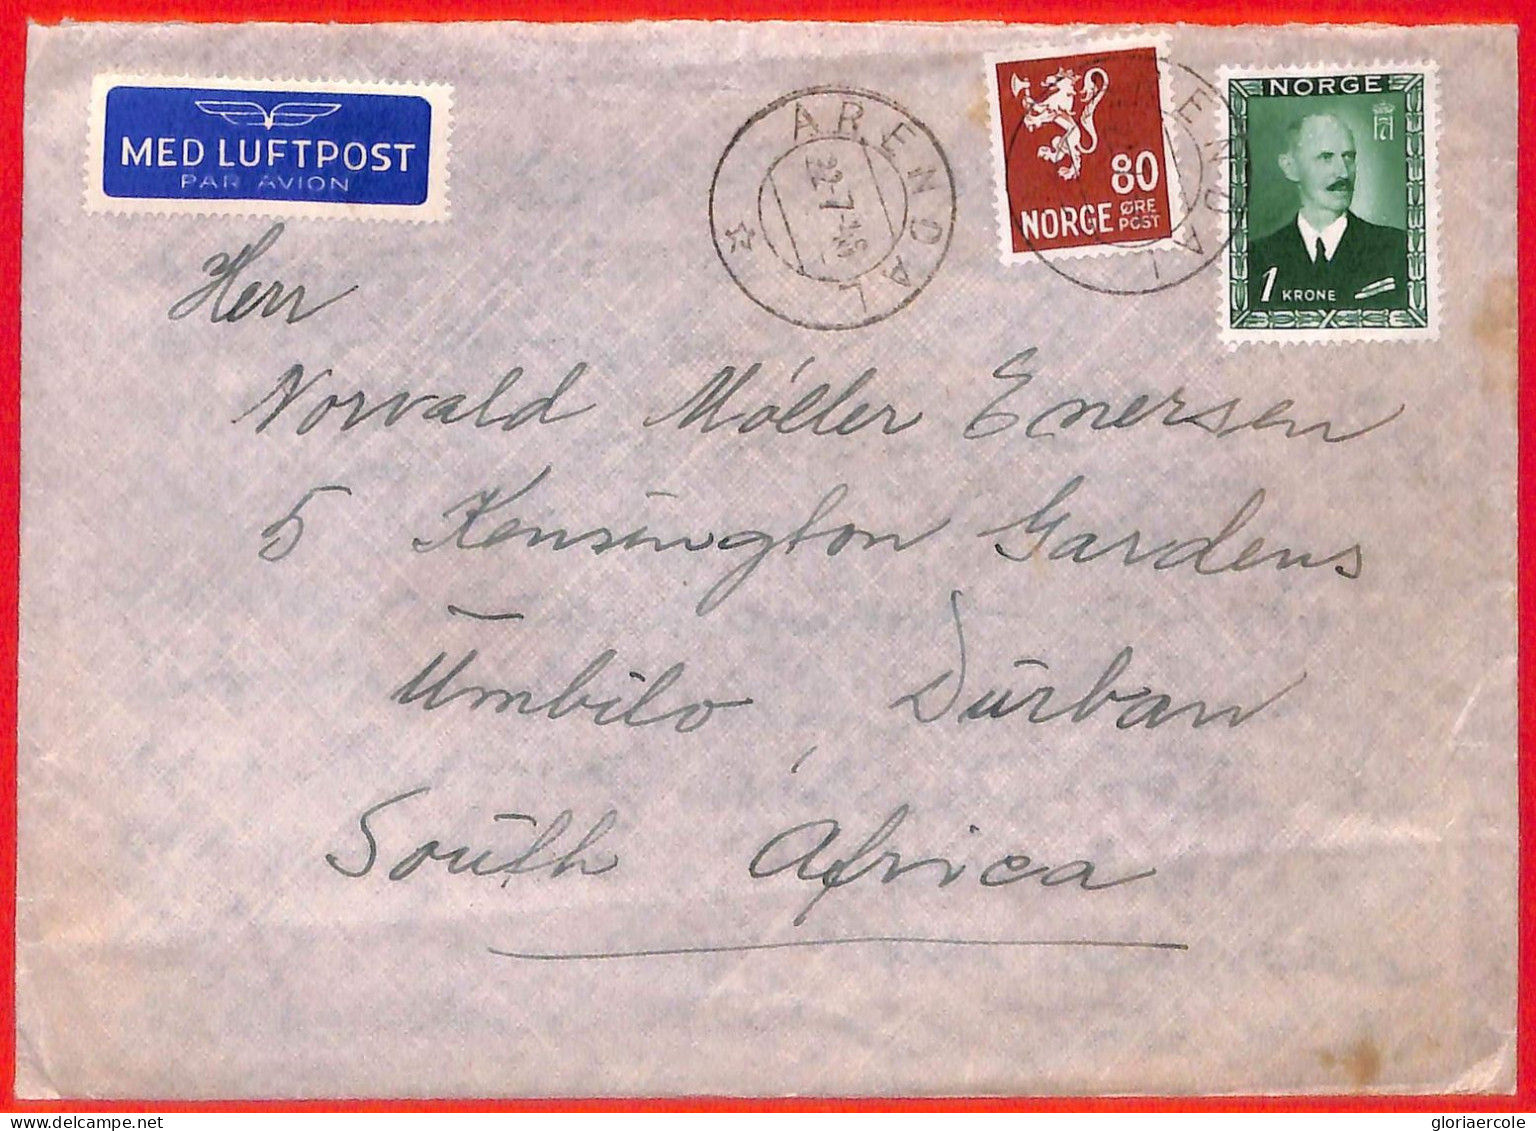 Aa1138 - NORWAY - Postal History -  AIRMAIL COVER To SOUTH AFRICA 1948 - Briefe U. Dokumente